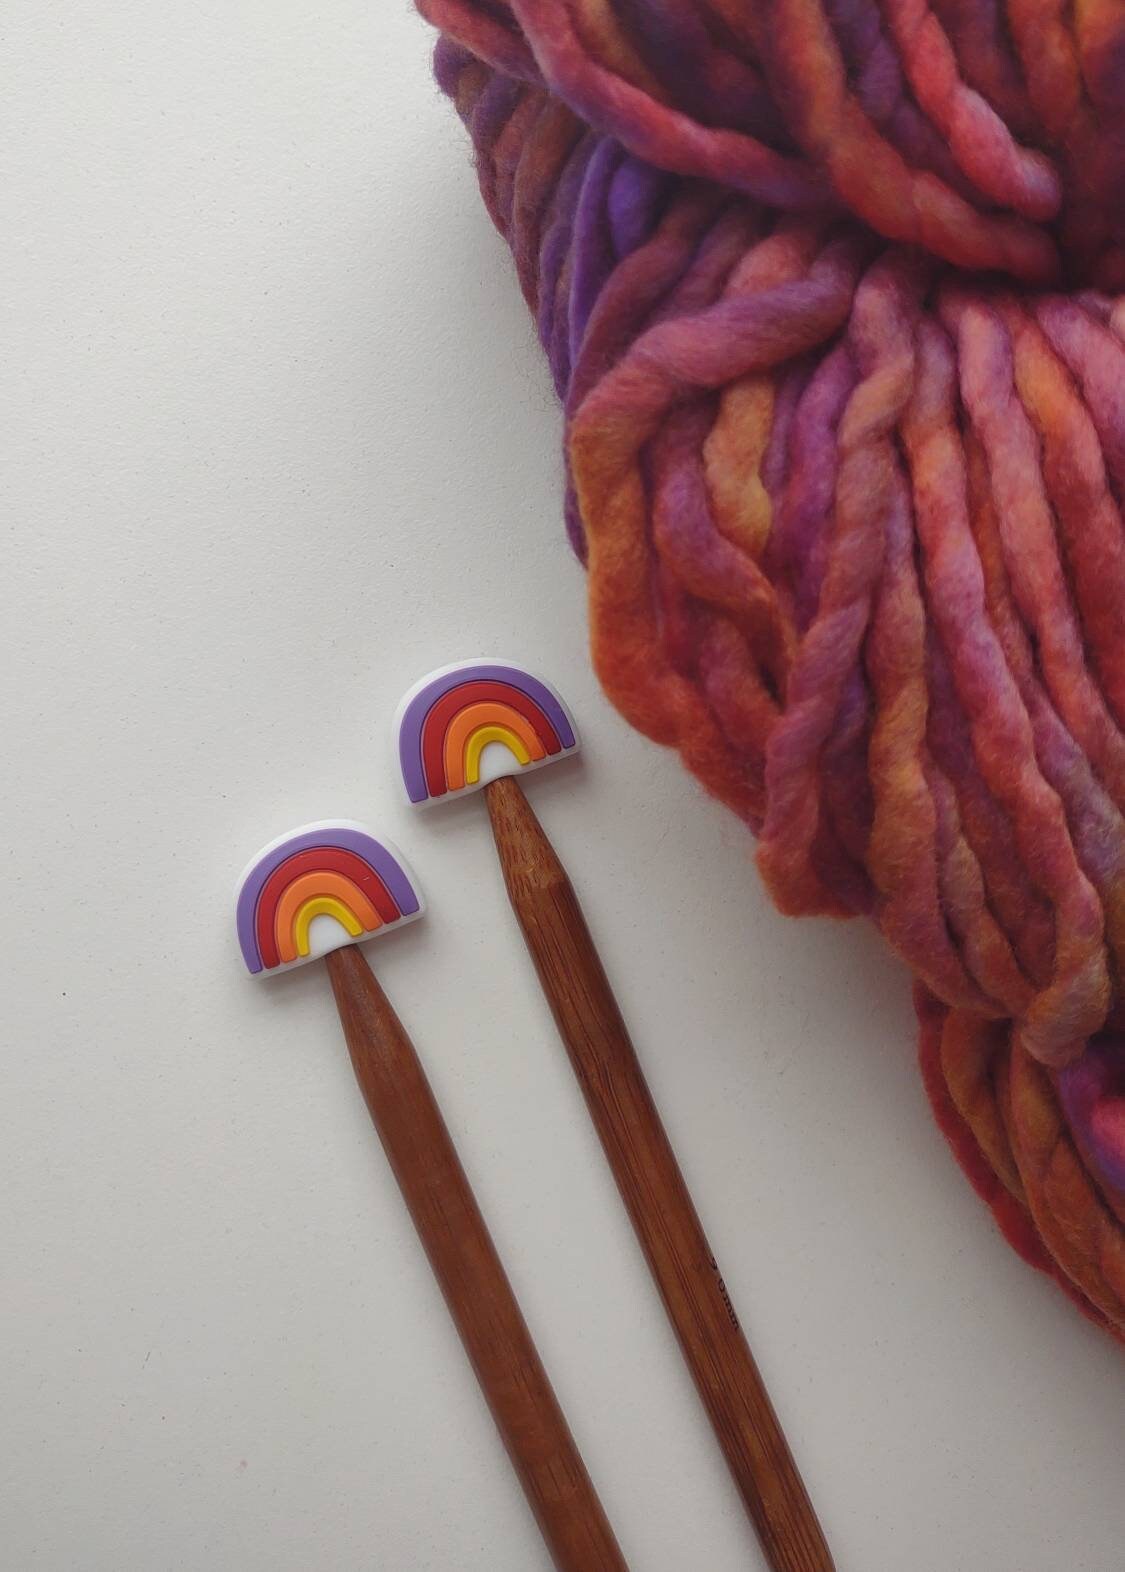 Rainbow Knitting Needle Stitch Stoppers. Needle Protectors. Knitting Needle Stoppers. Knitting Notions, Accessories, Supplies, Tools.